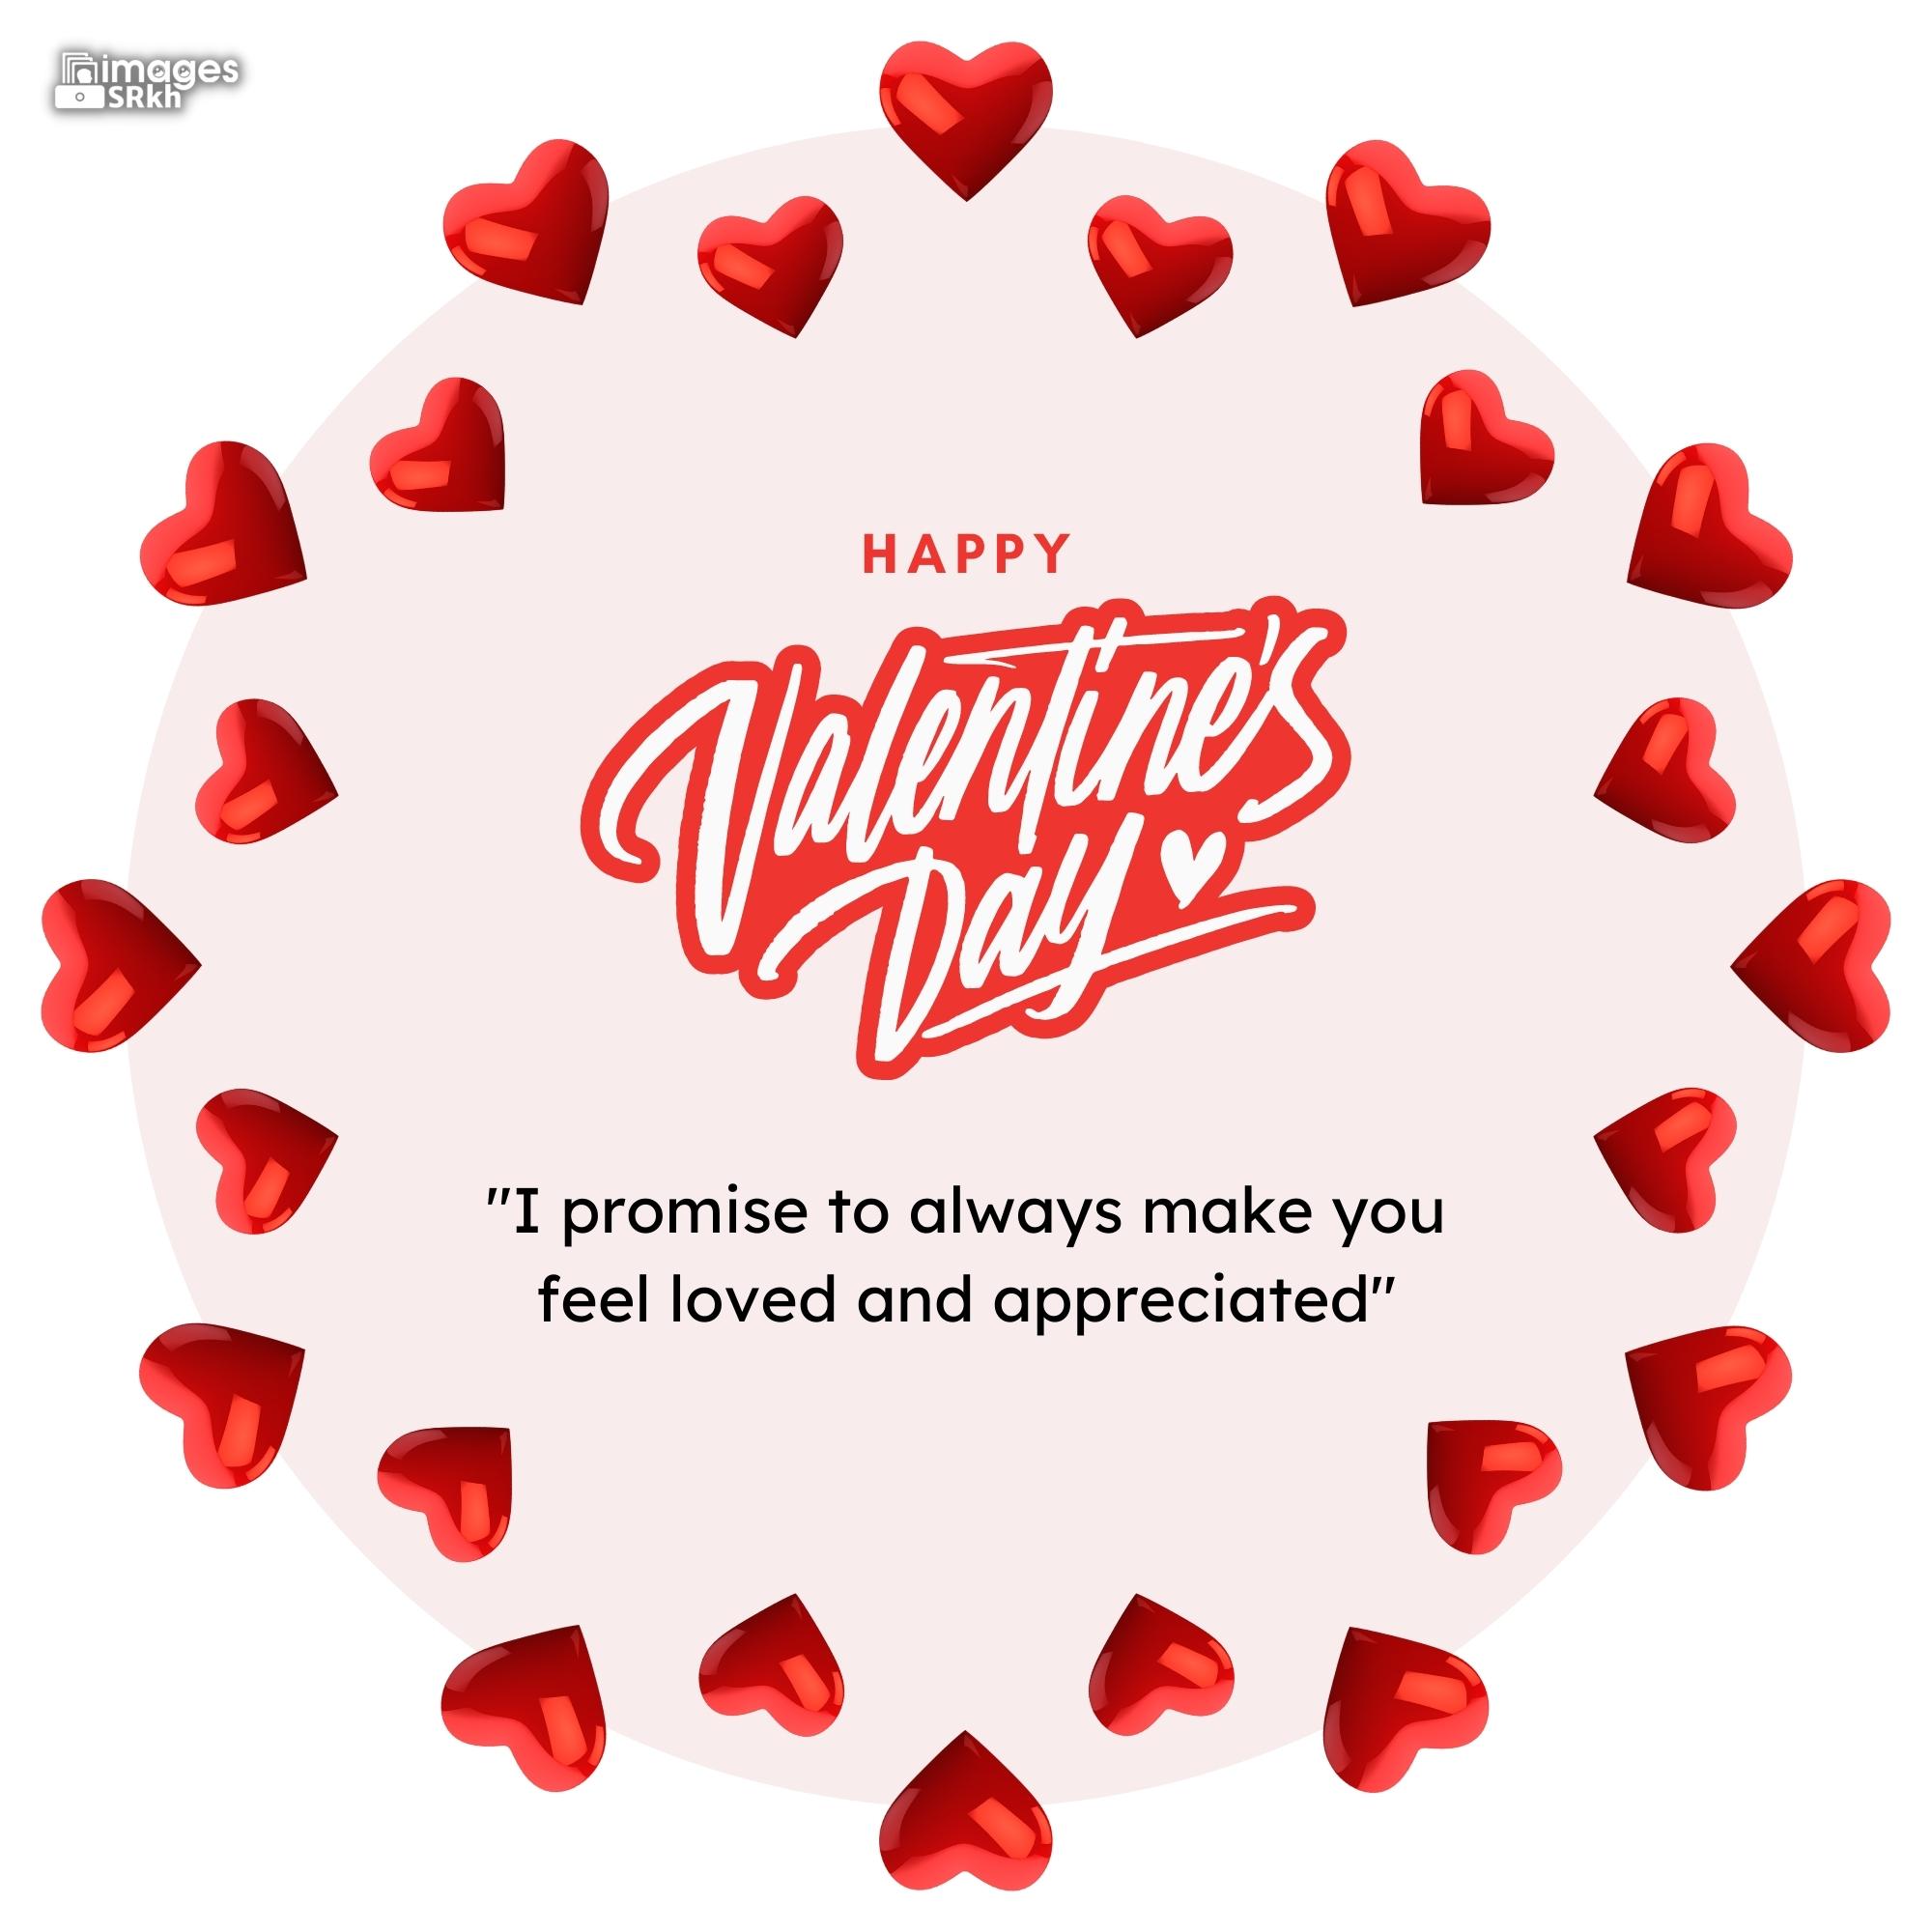 Happy Valentines Day | 516 | PREMIUM IMAGES | Wishes for Love